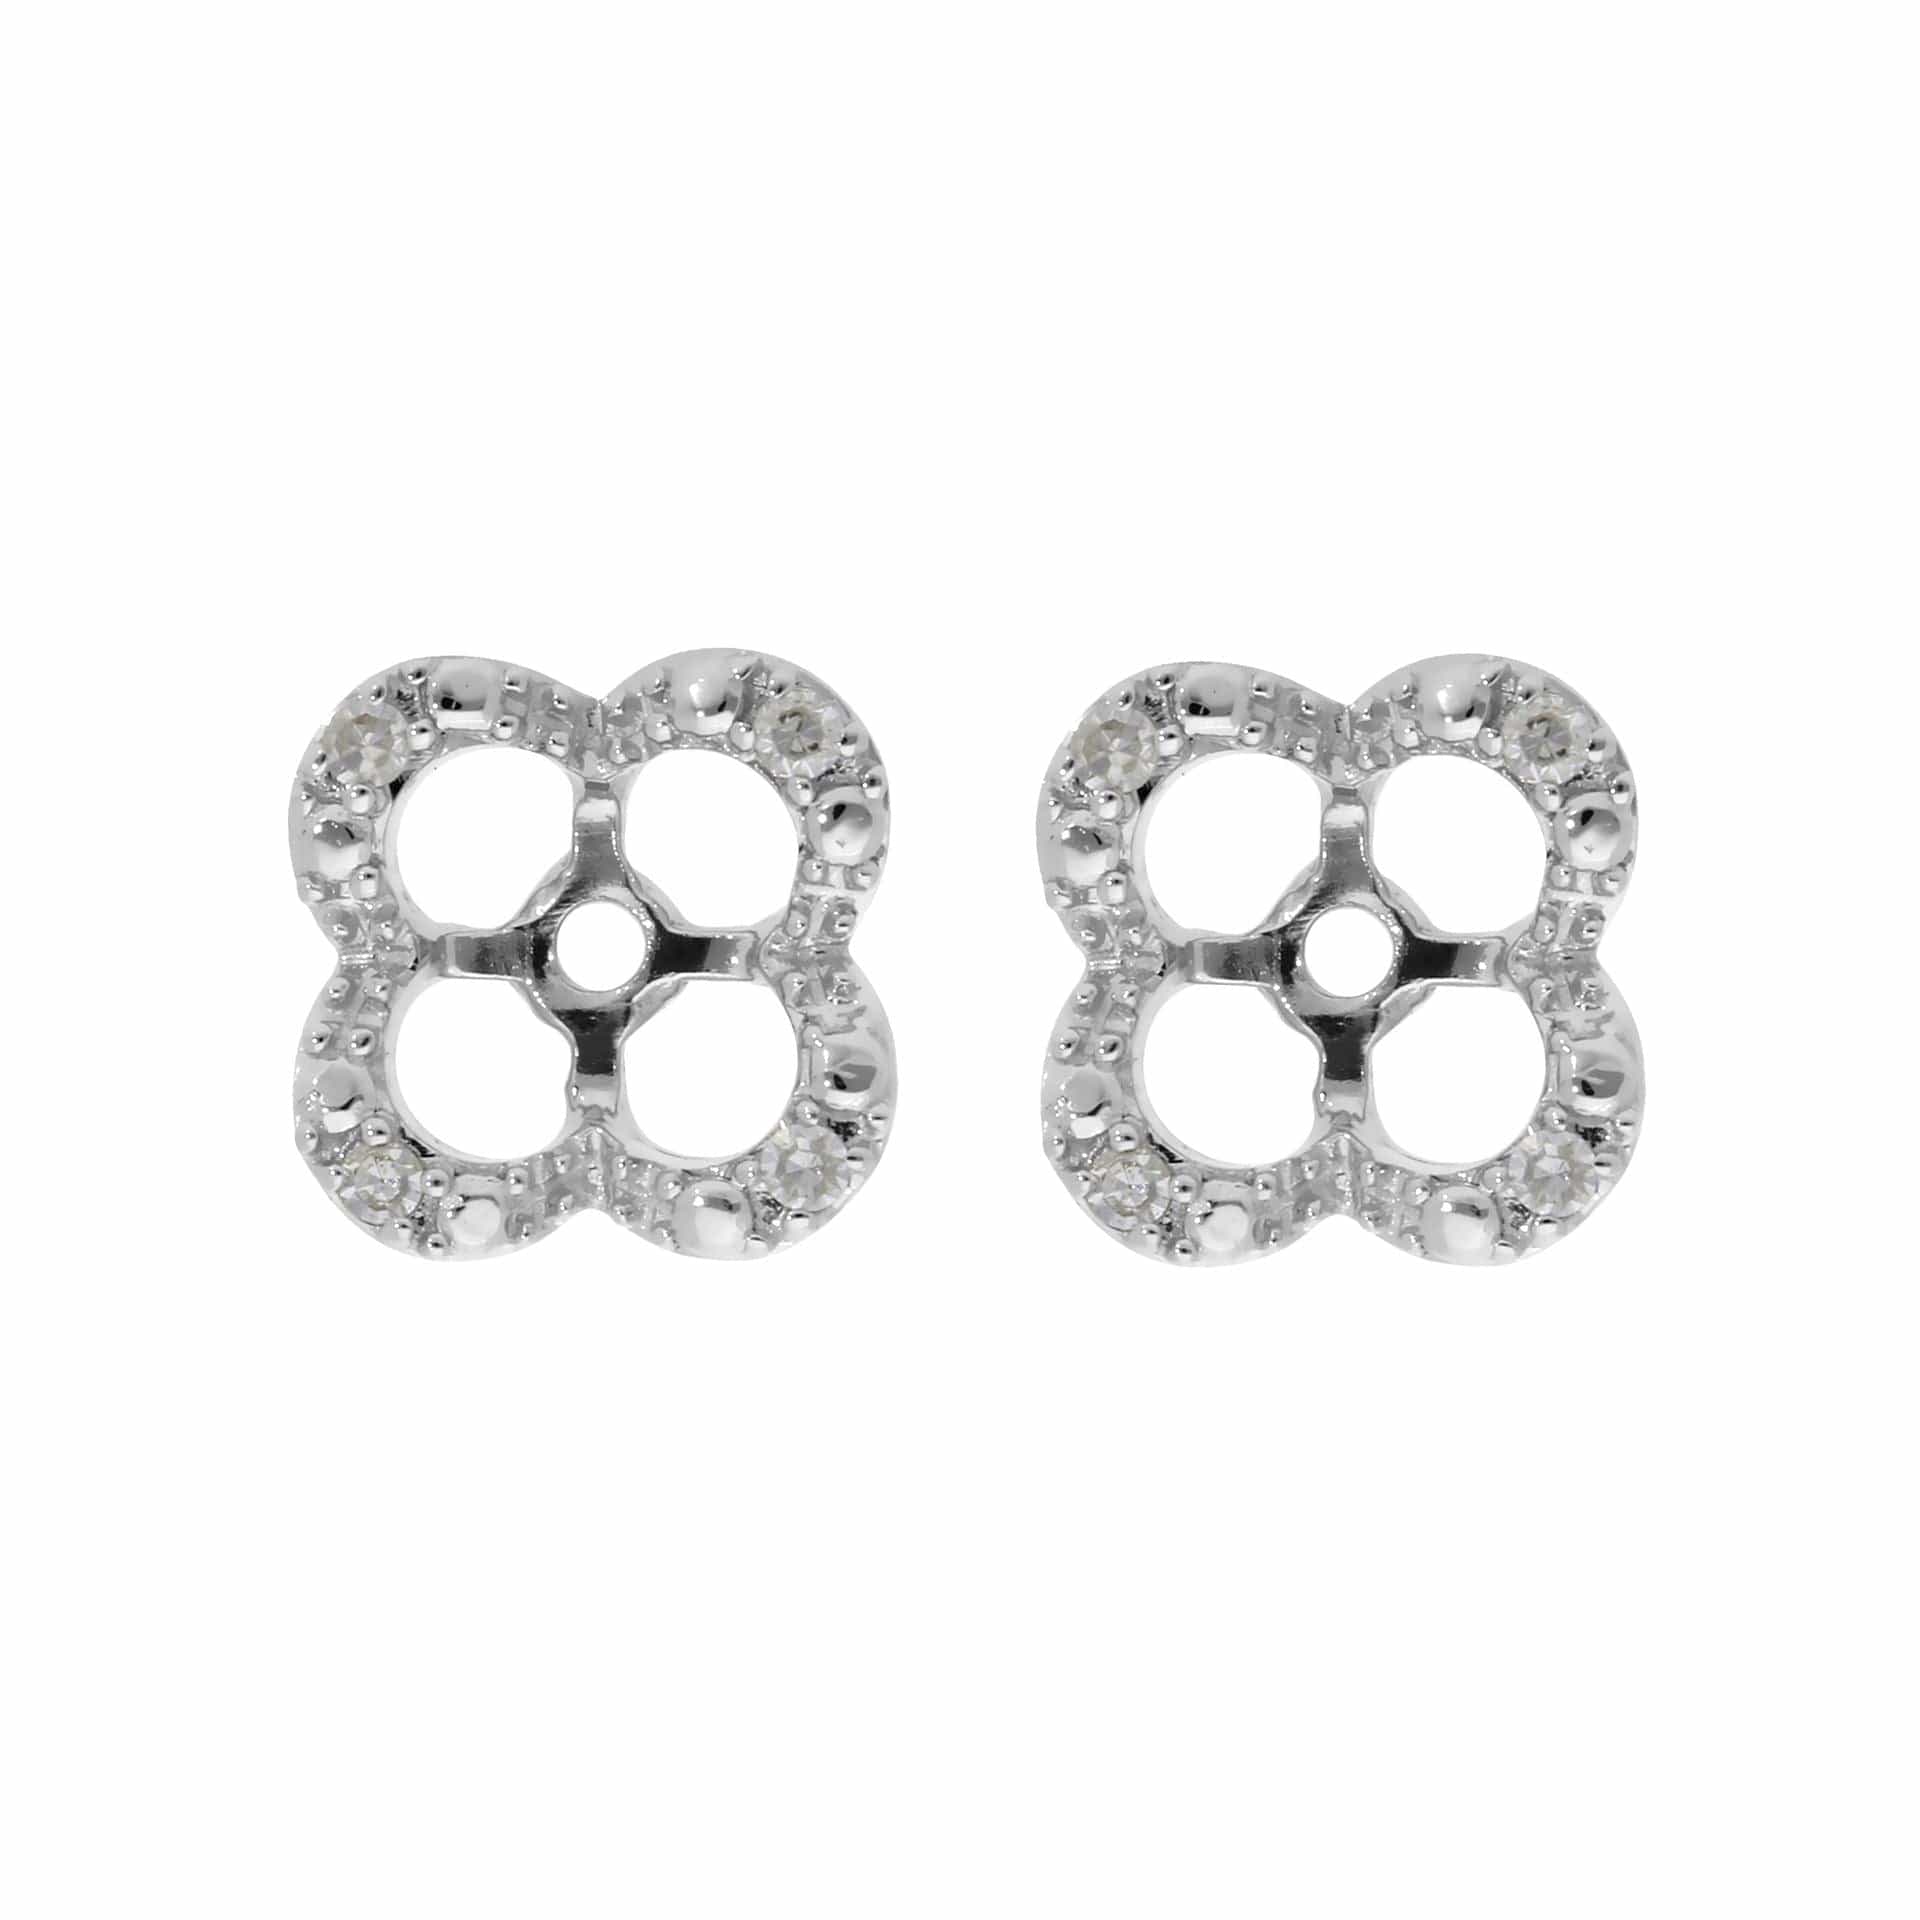 162E0244019 Floral Round Diamond Clover Shape Earrings Jacked in 9ct White Gold 1